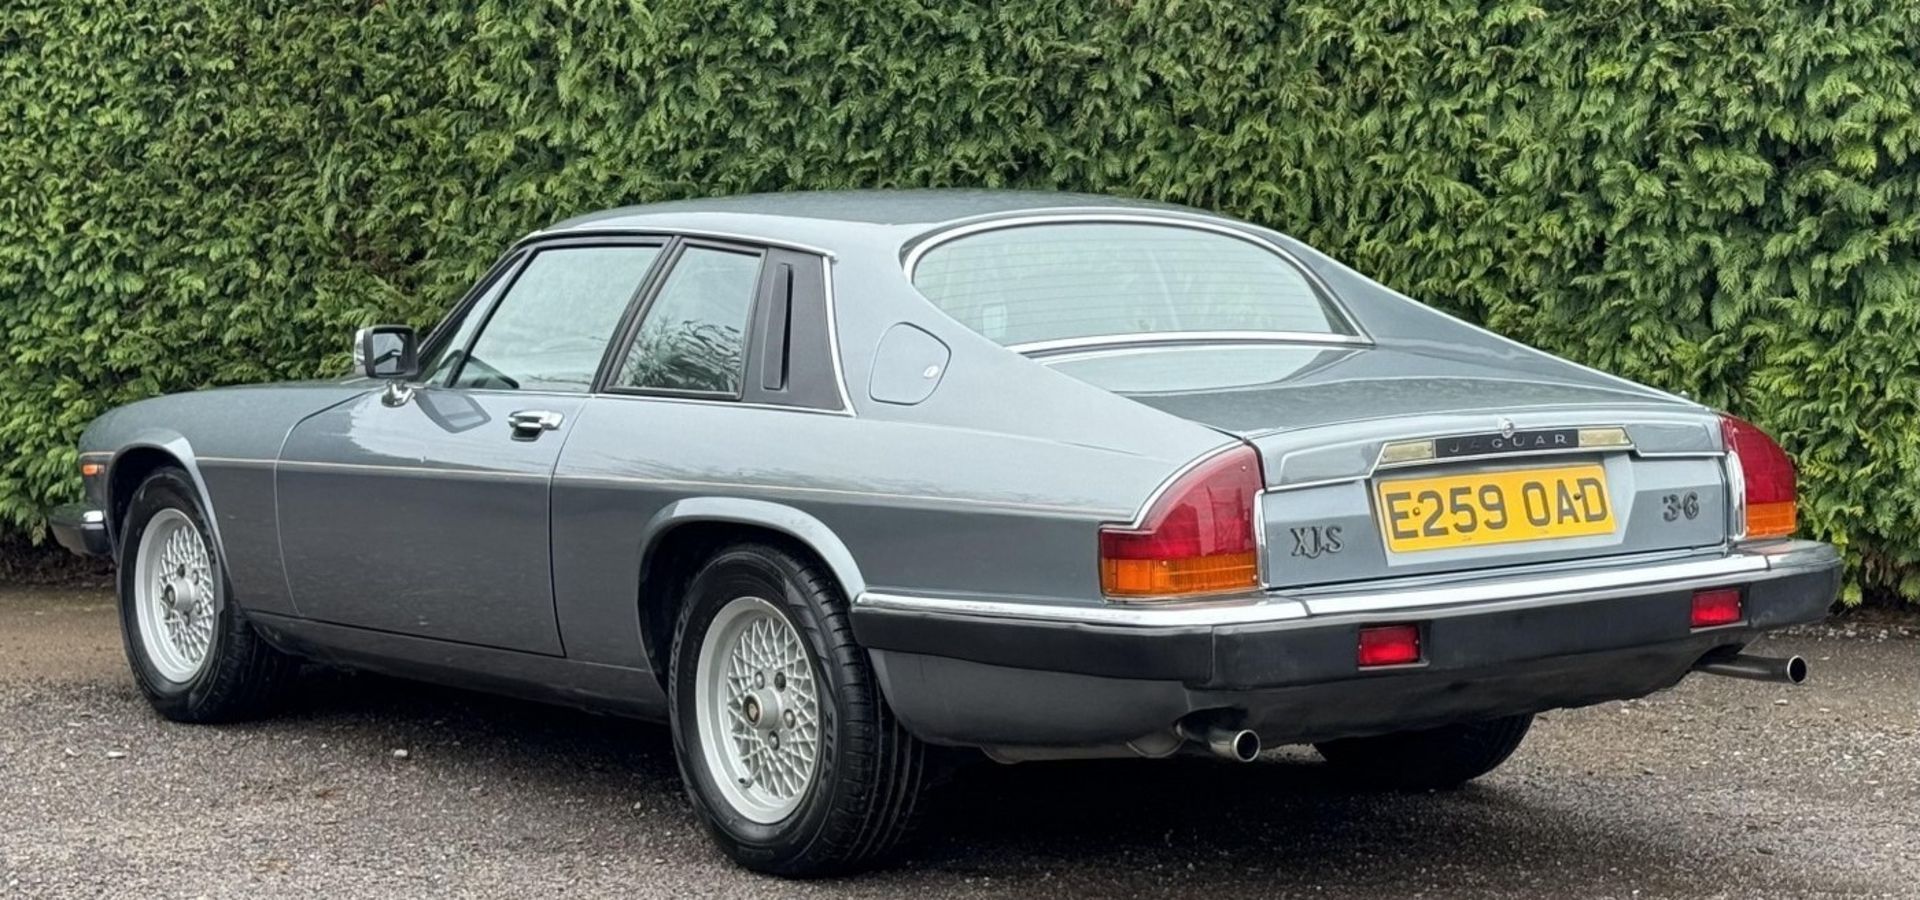 1988 Jaguar XJ-S 3.6 Coupe Registration number E259 OAD Metallic light blue with a half leather - Image 3 of 24